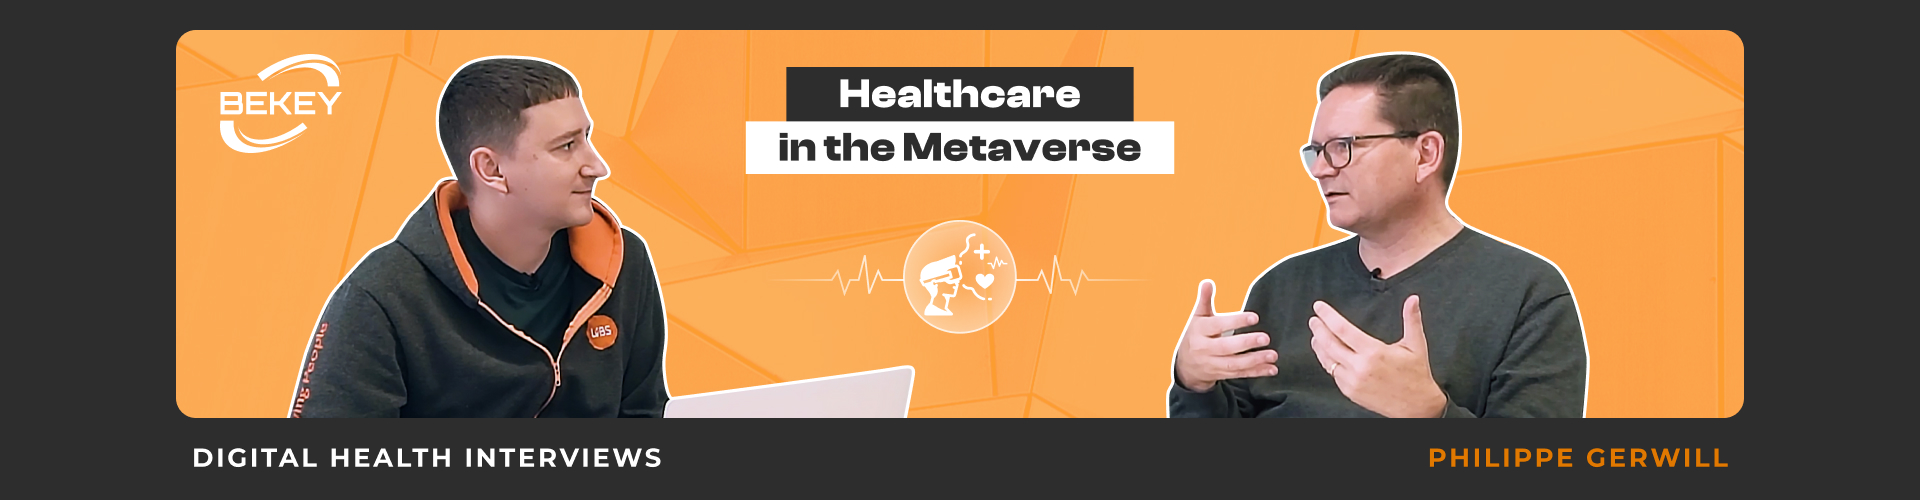 Healthcare in the Metaverse. Digital Health Interviews: Philippe Gerwill - image